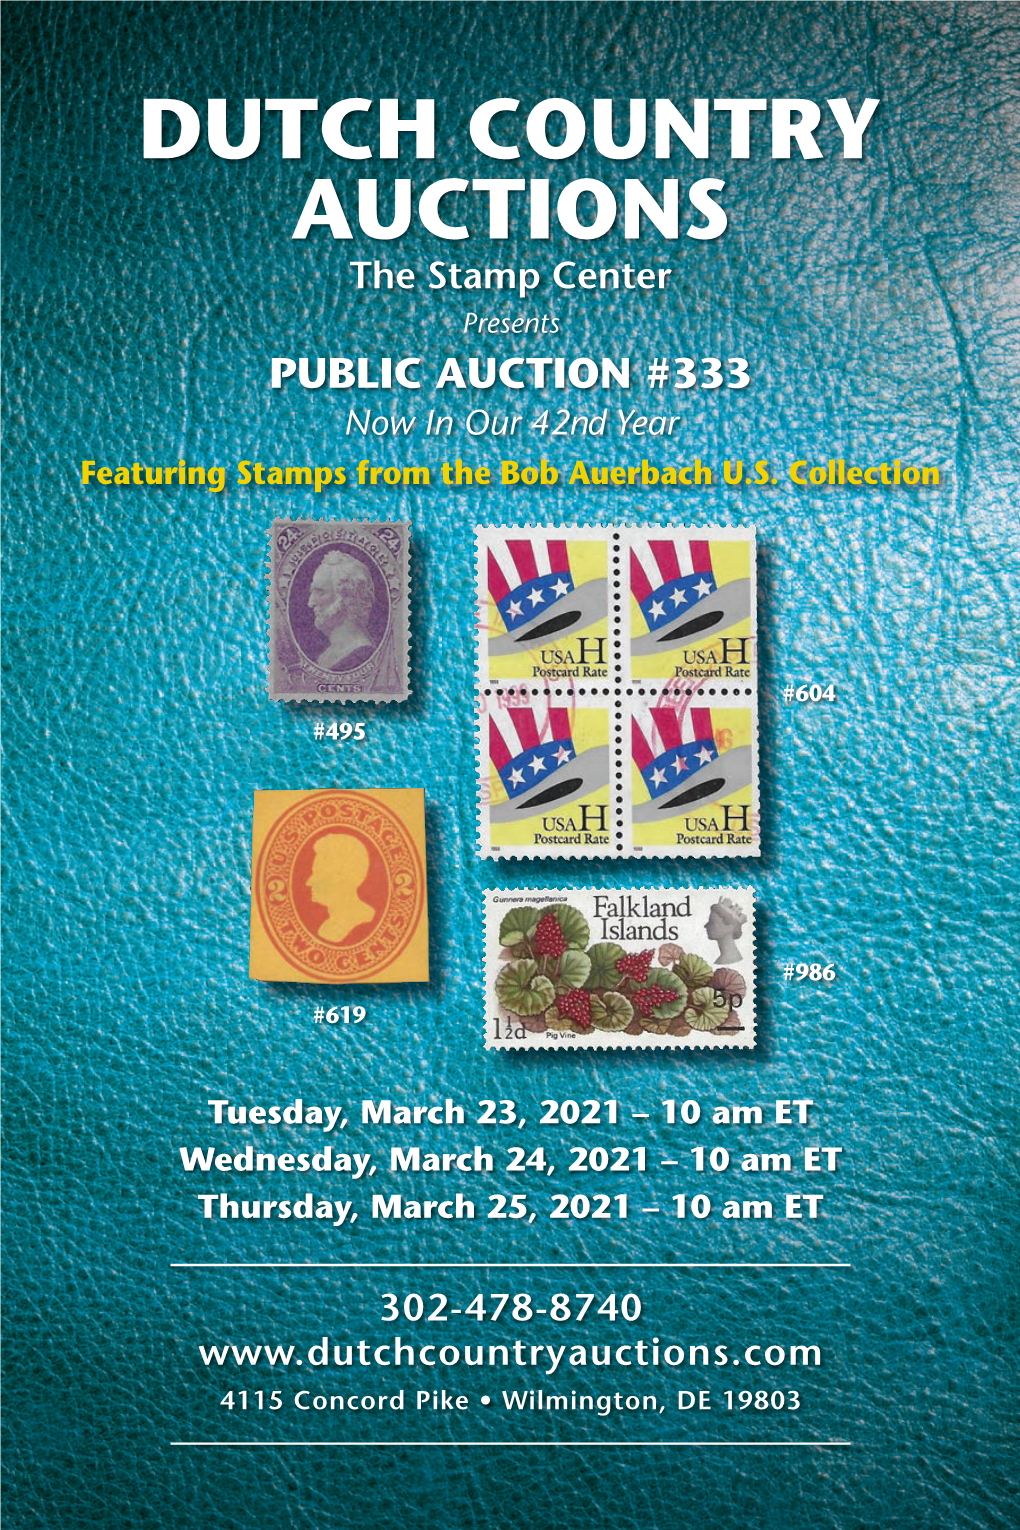 DUTCH COUNTRY AUCTIONS the Stamp Center Presents PUBLIC AUCTION #333 Now in Our 42Nd Year Featuring Stamps from the Bob Auerbach U.S